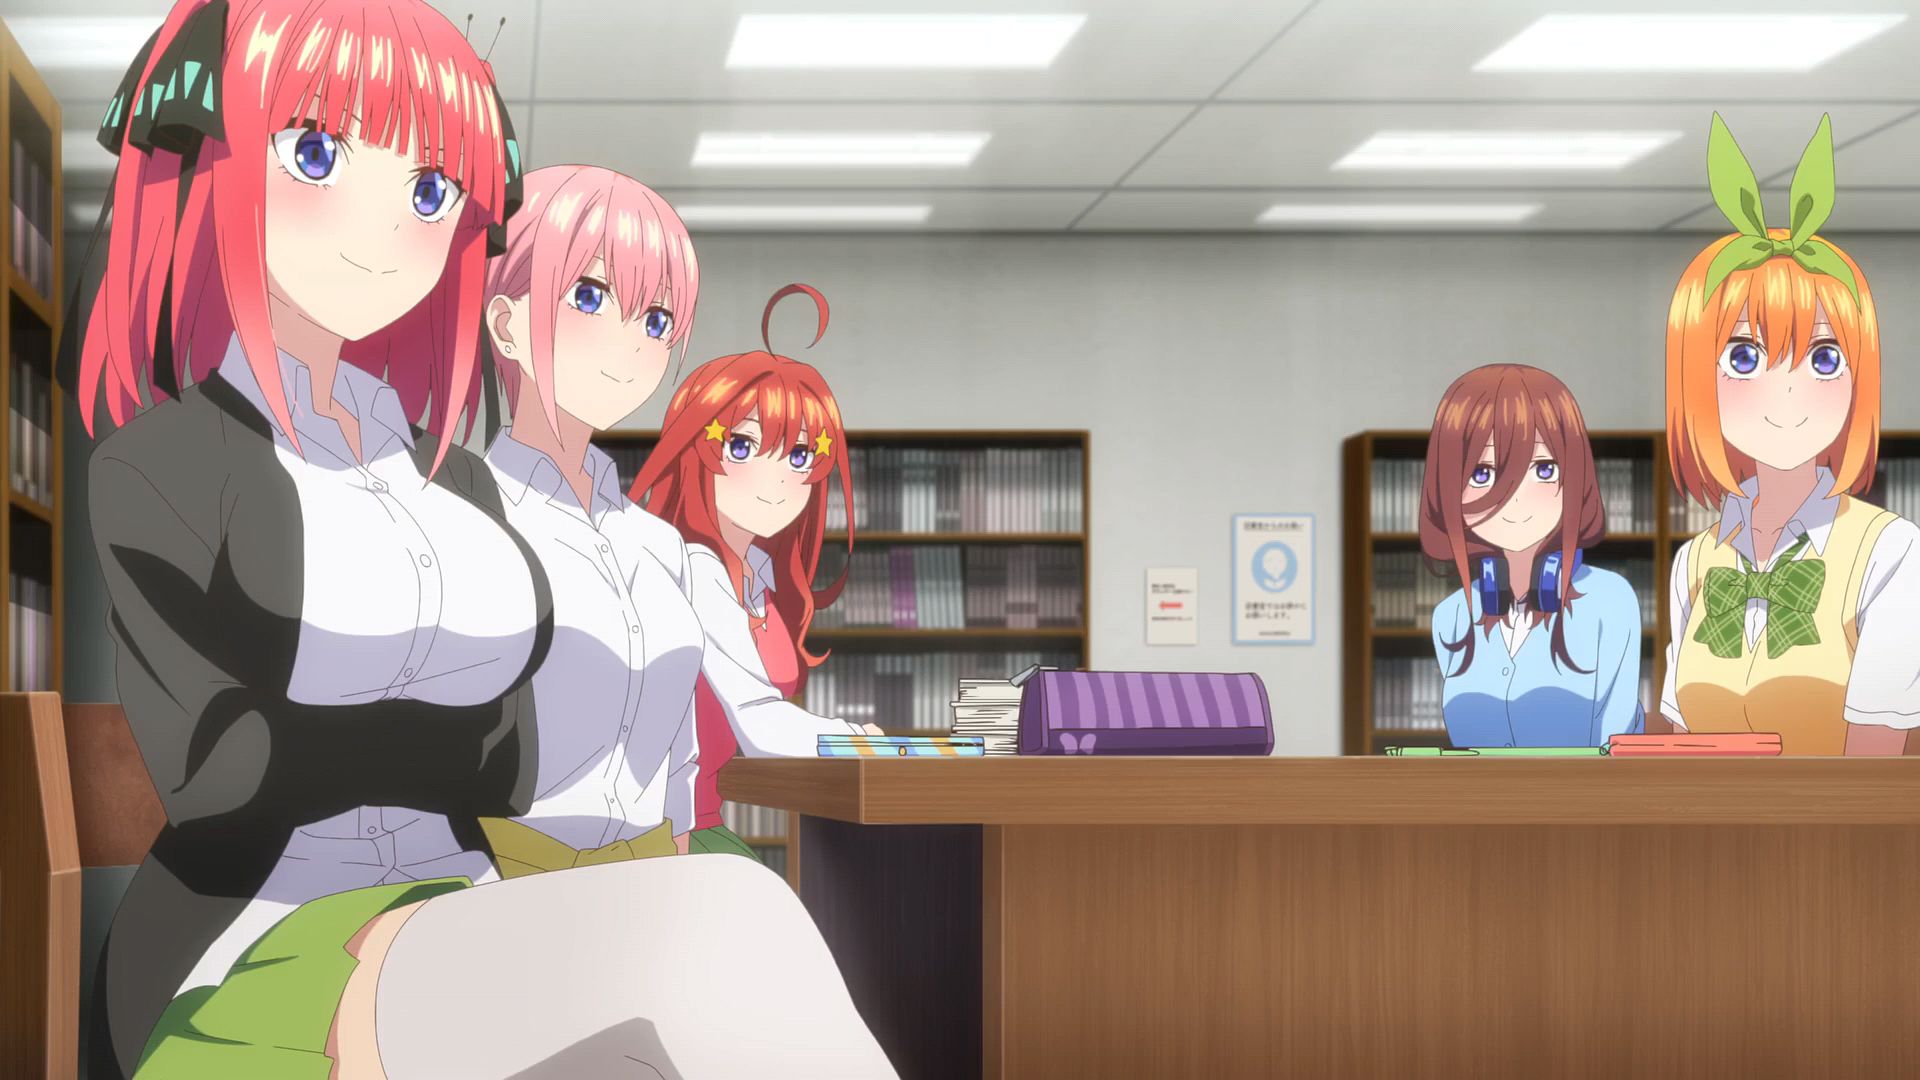 The Quintessential Quintuplets - Wikipedia bahasa Indonesia